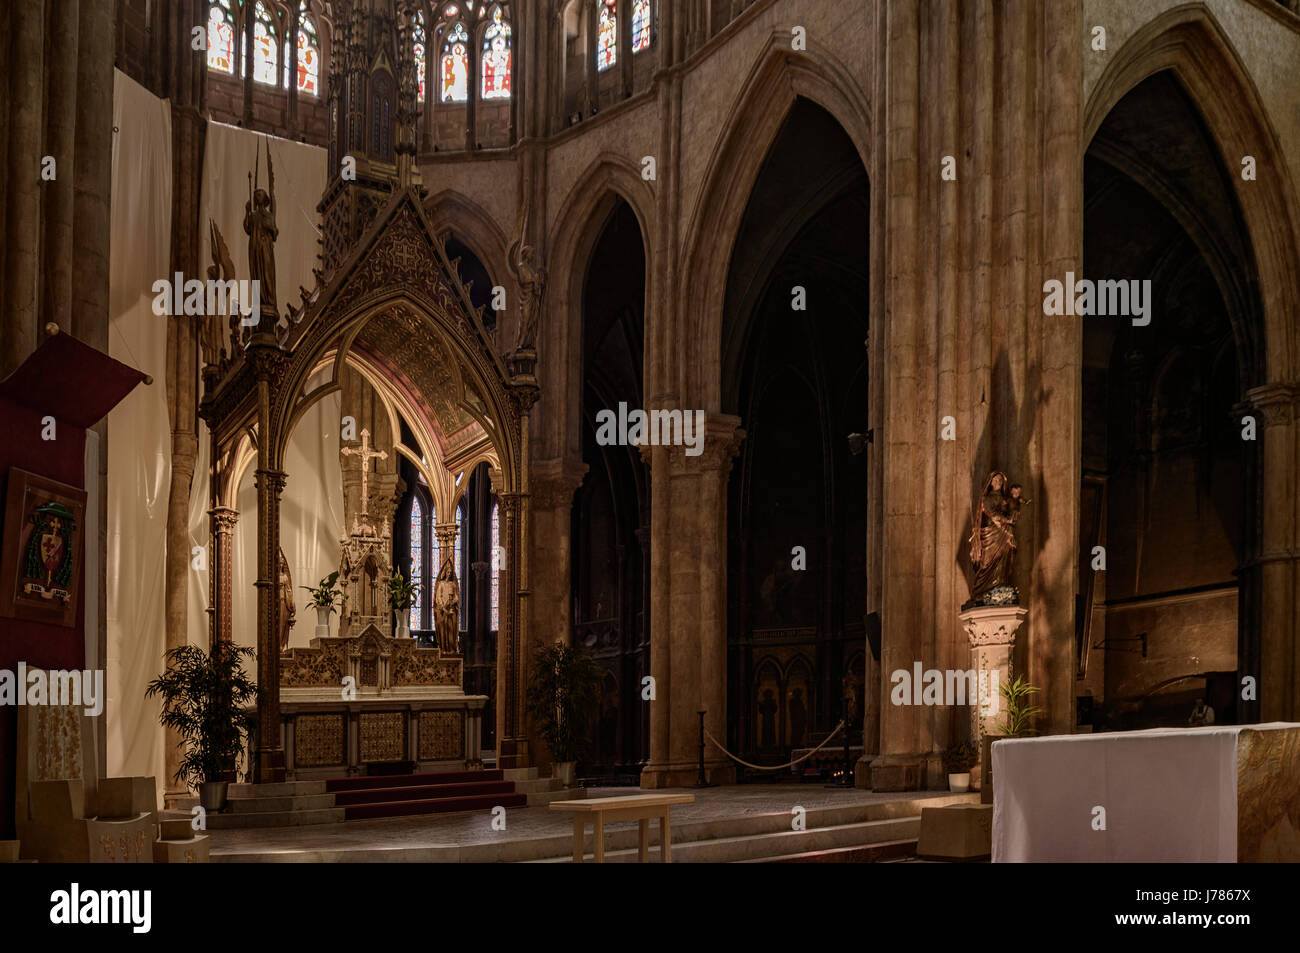 Interior of the cathedral Saint Marie, Bayonne, Aquitaine, France, Europe Stock Photo